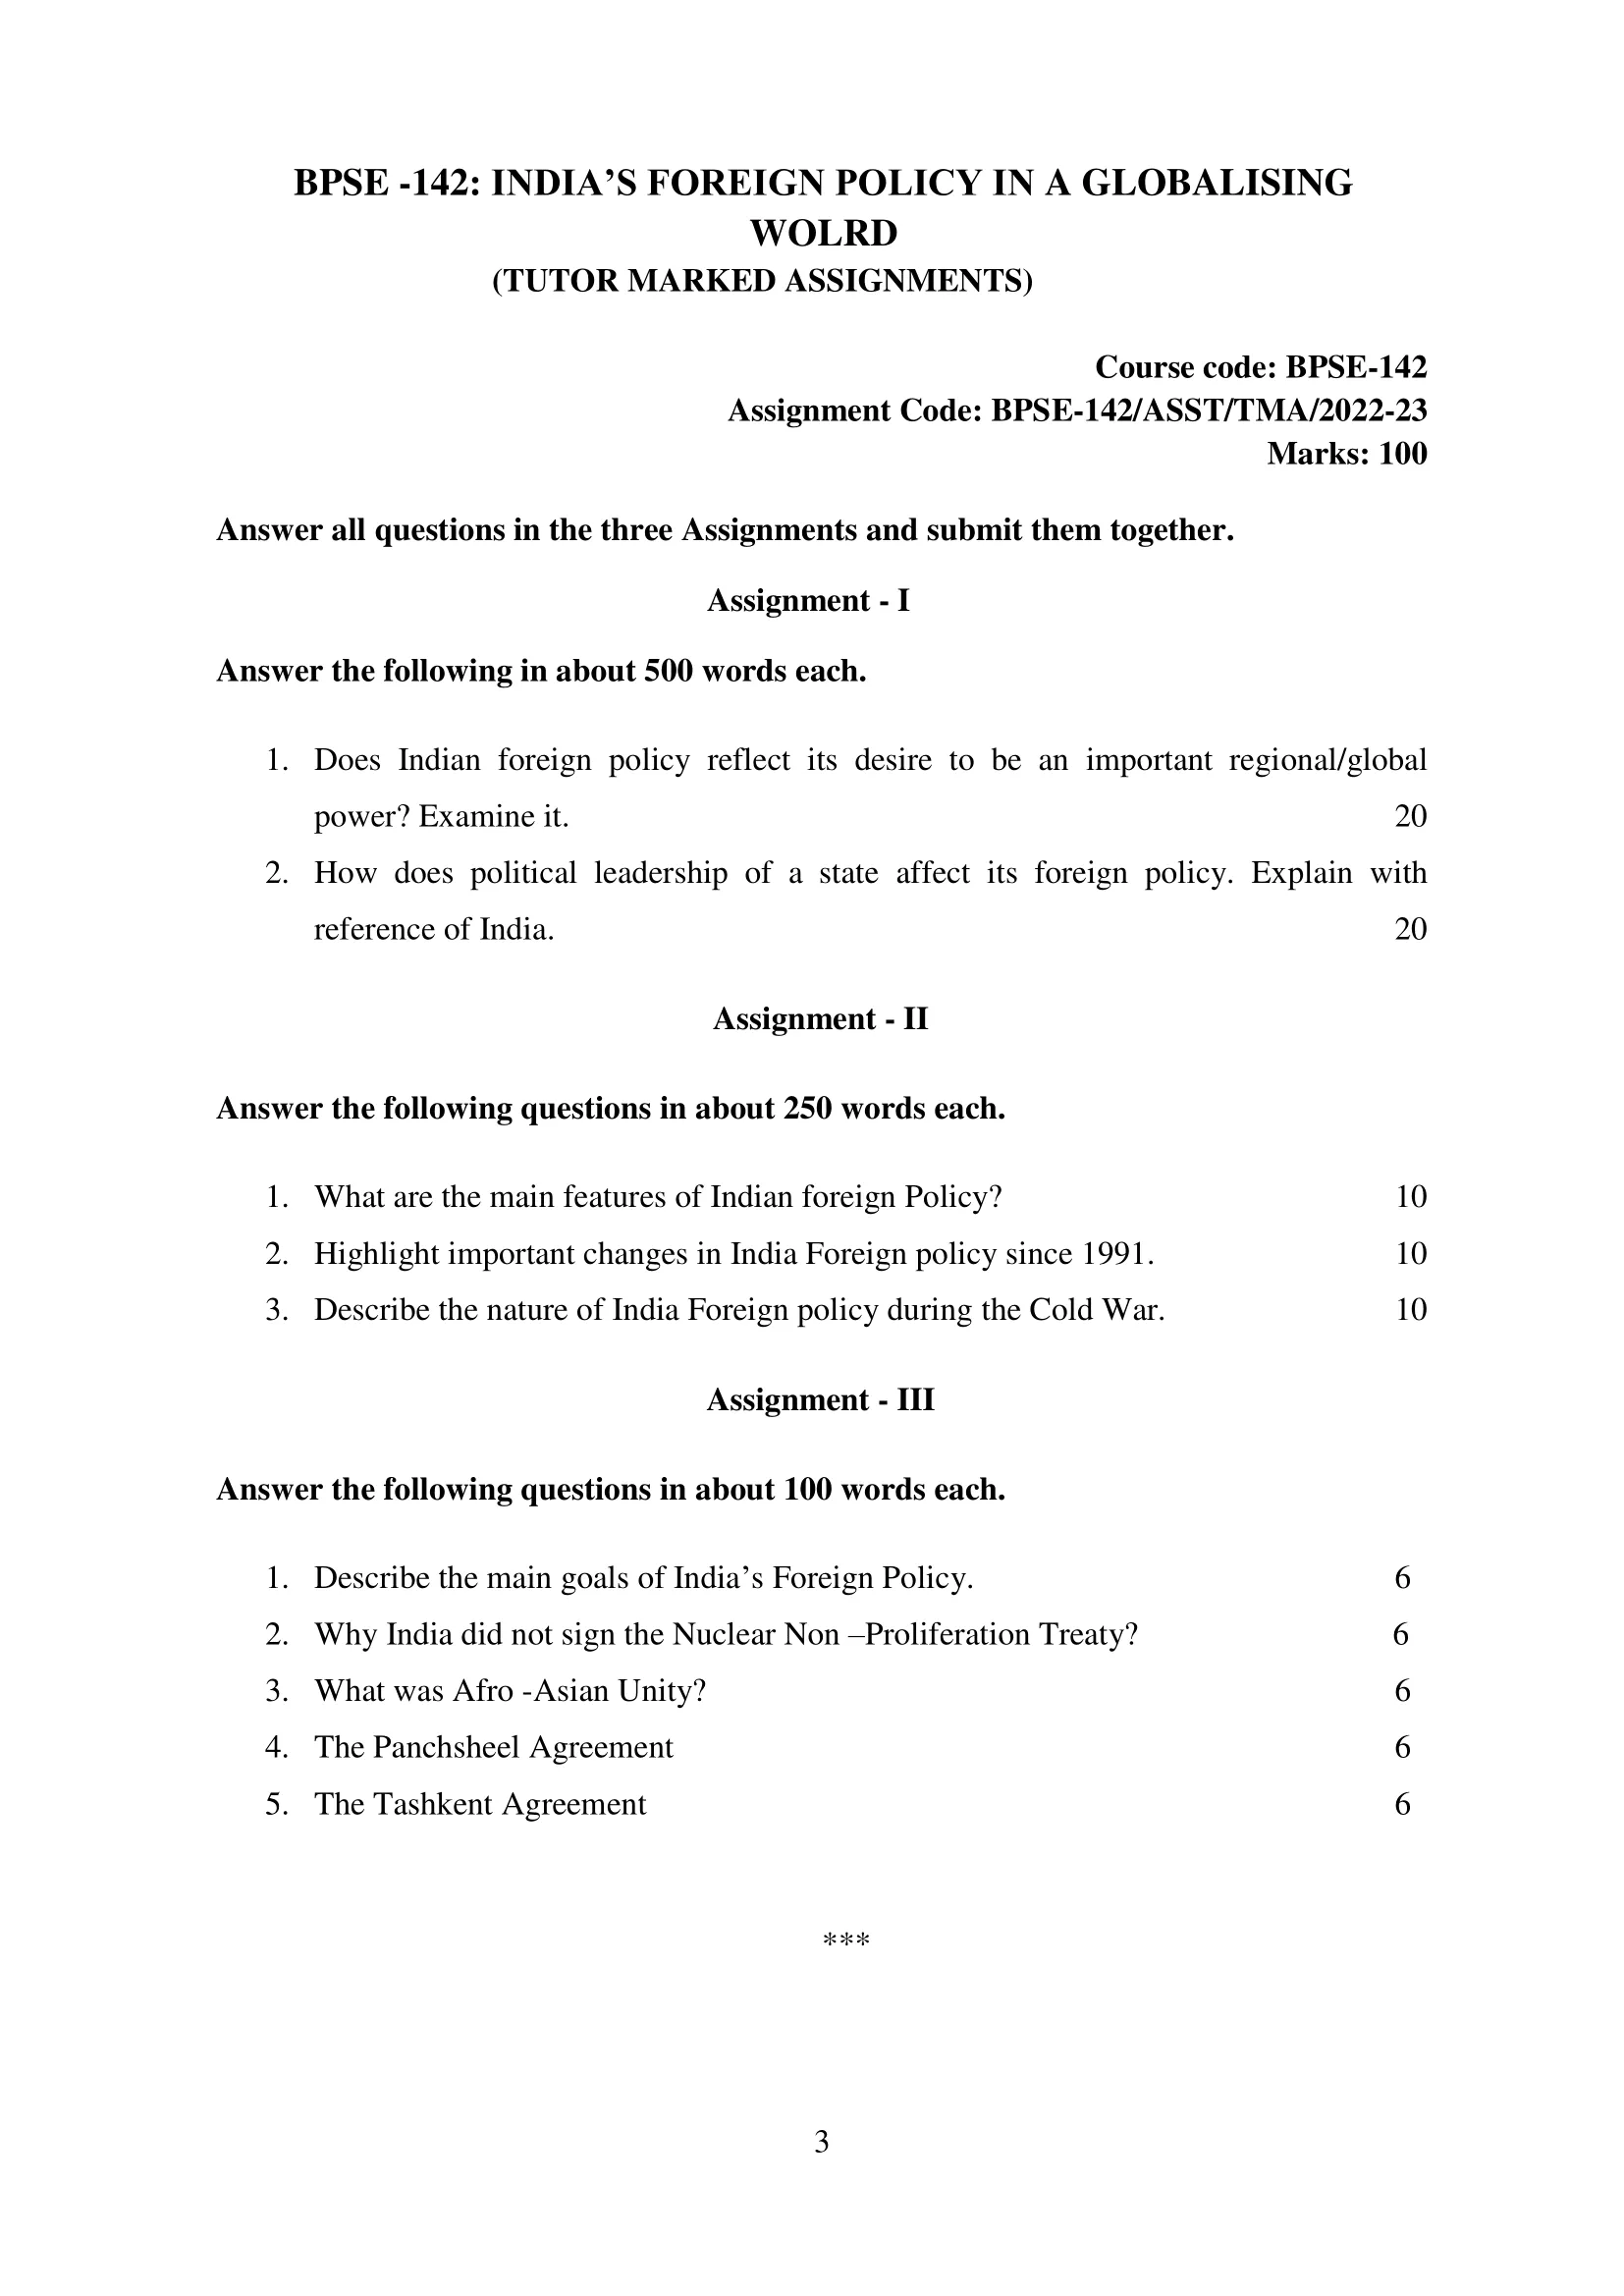 BPSE 142 IGNOU Solved Assignment 2022-2023 INDIA’S FOREIGN POLICY IN A GLOBALISING WORLD